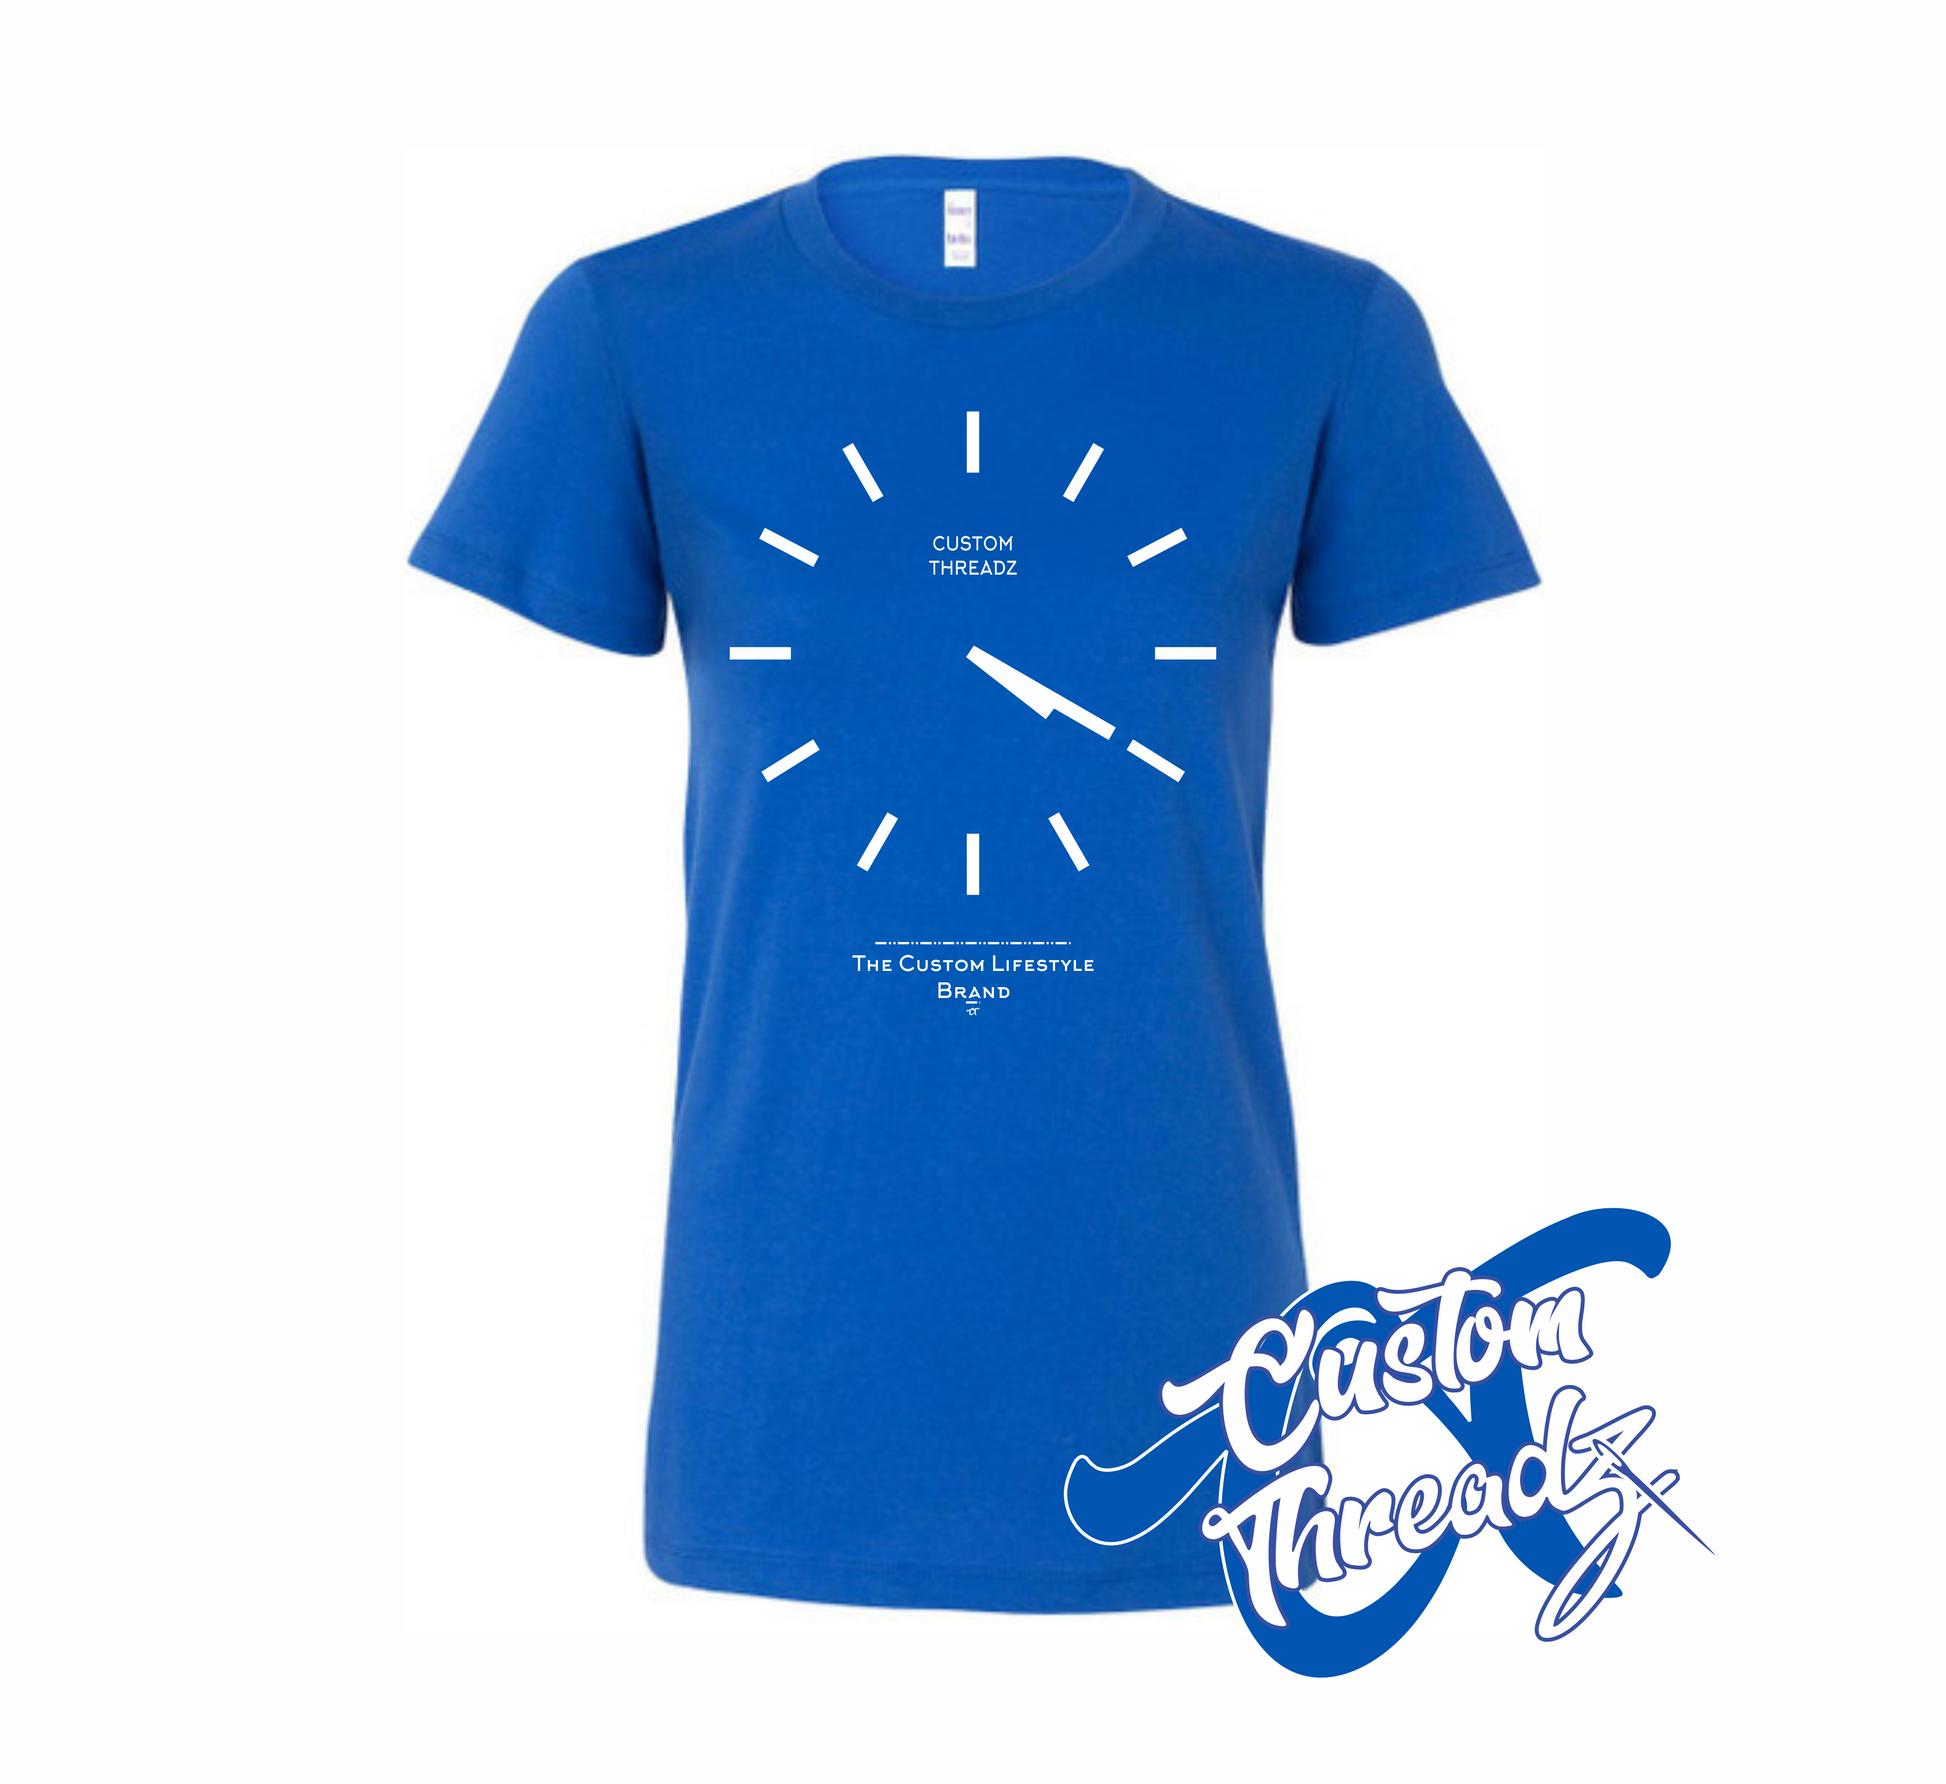 royal blue womens tee with basic analog clock set to 4 20 DTG printed design